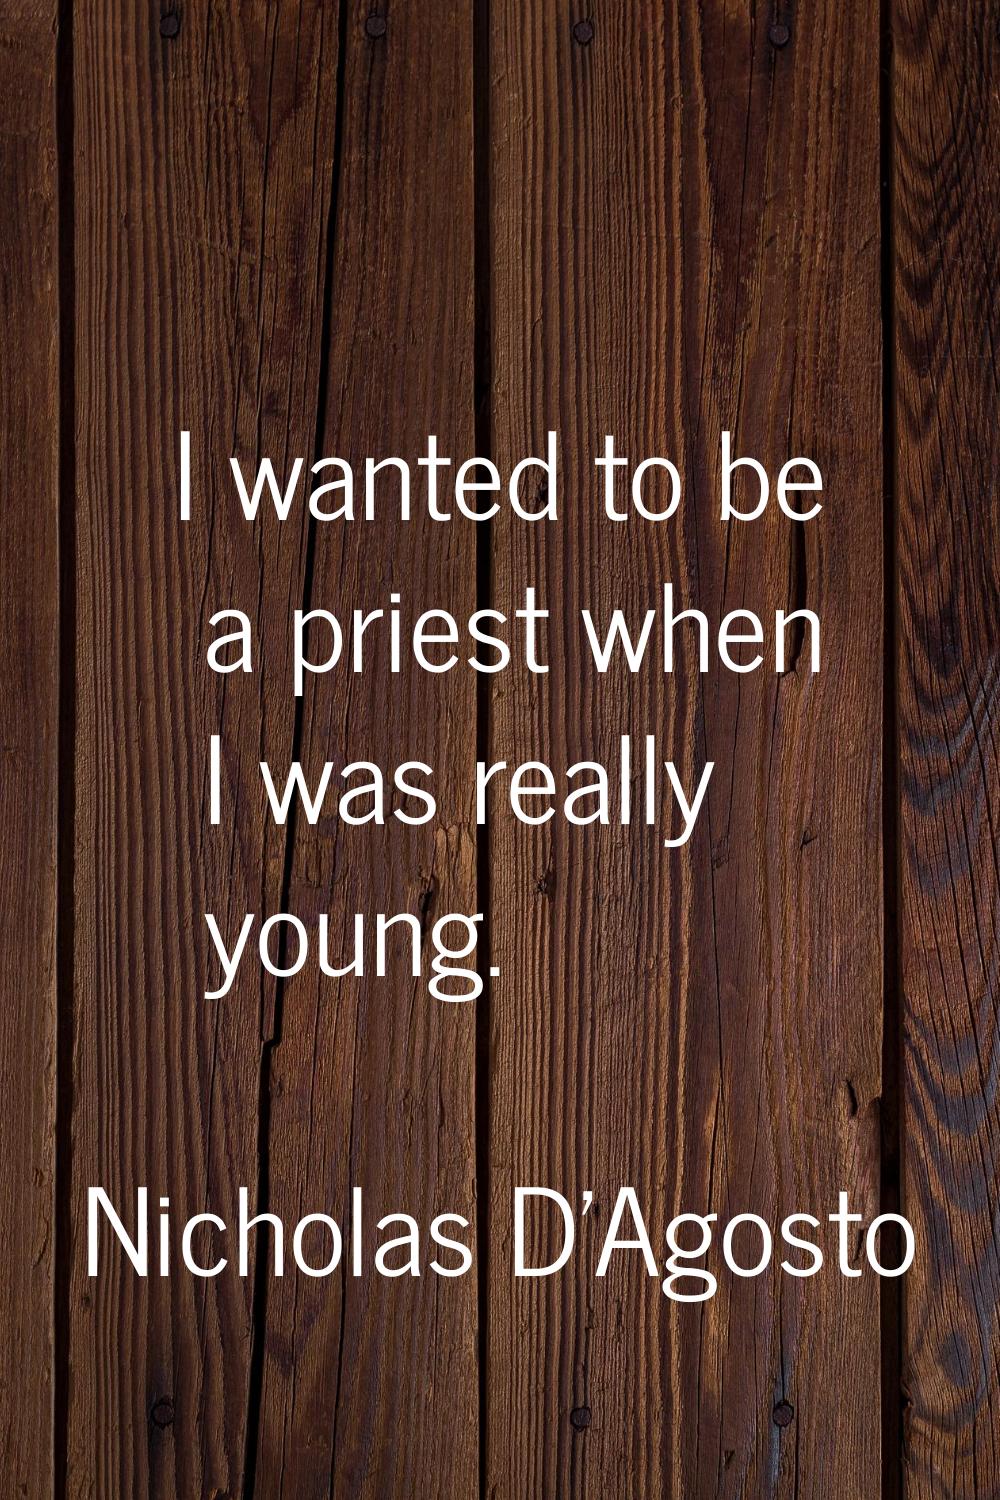 I wanted to be a priest when I was really young.